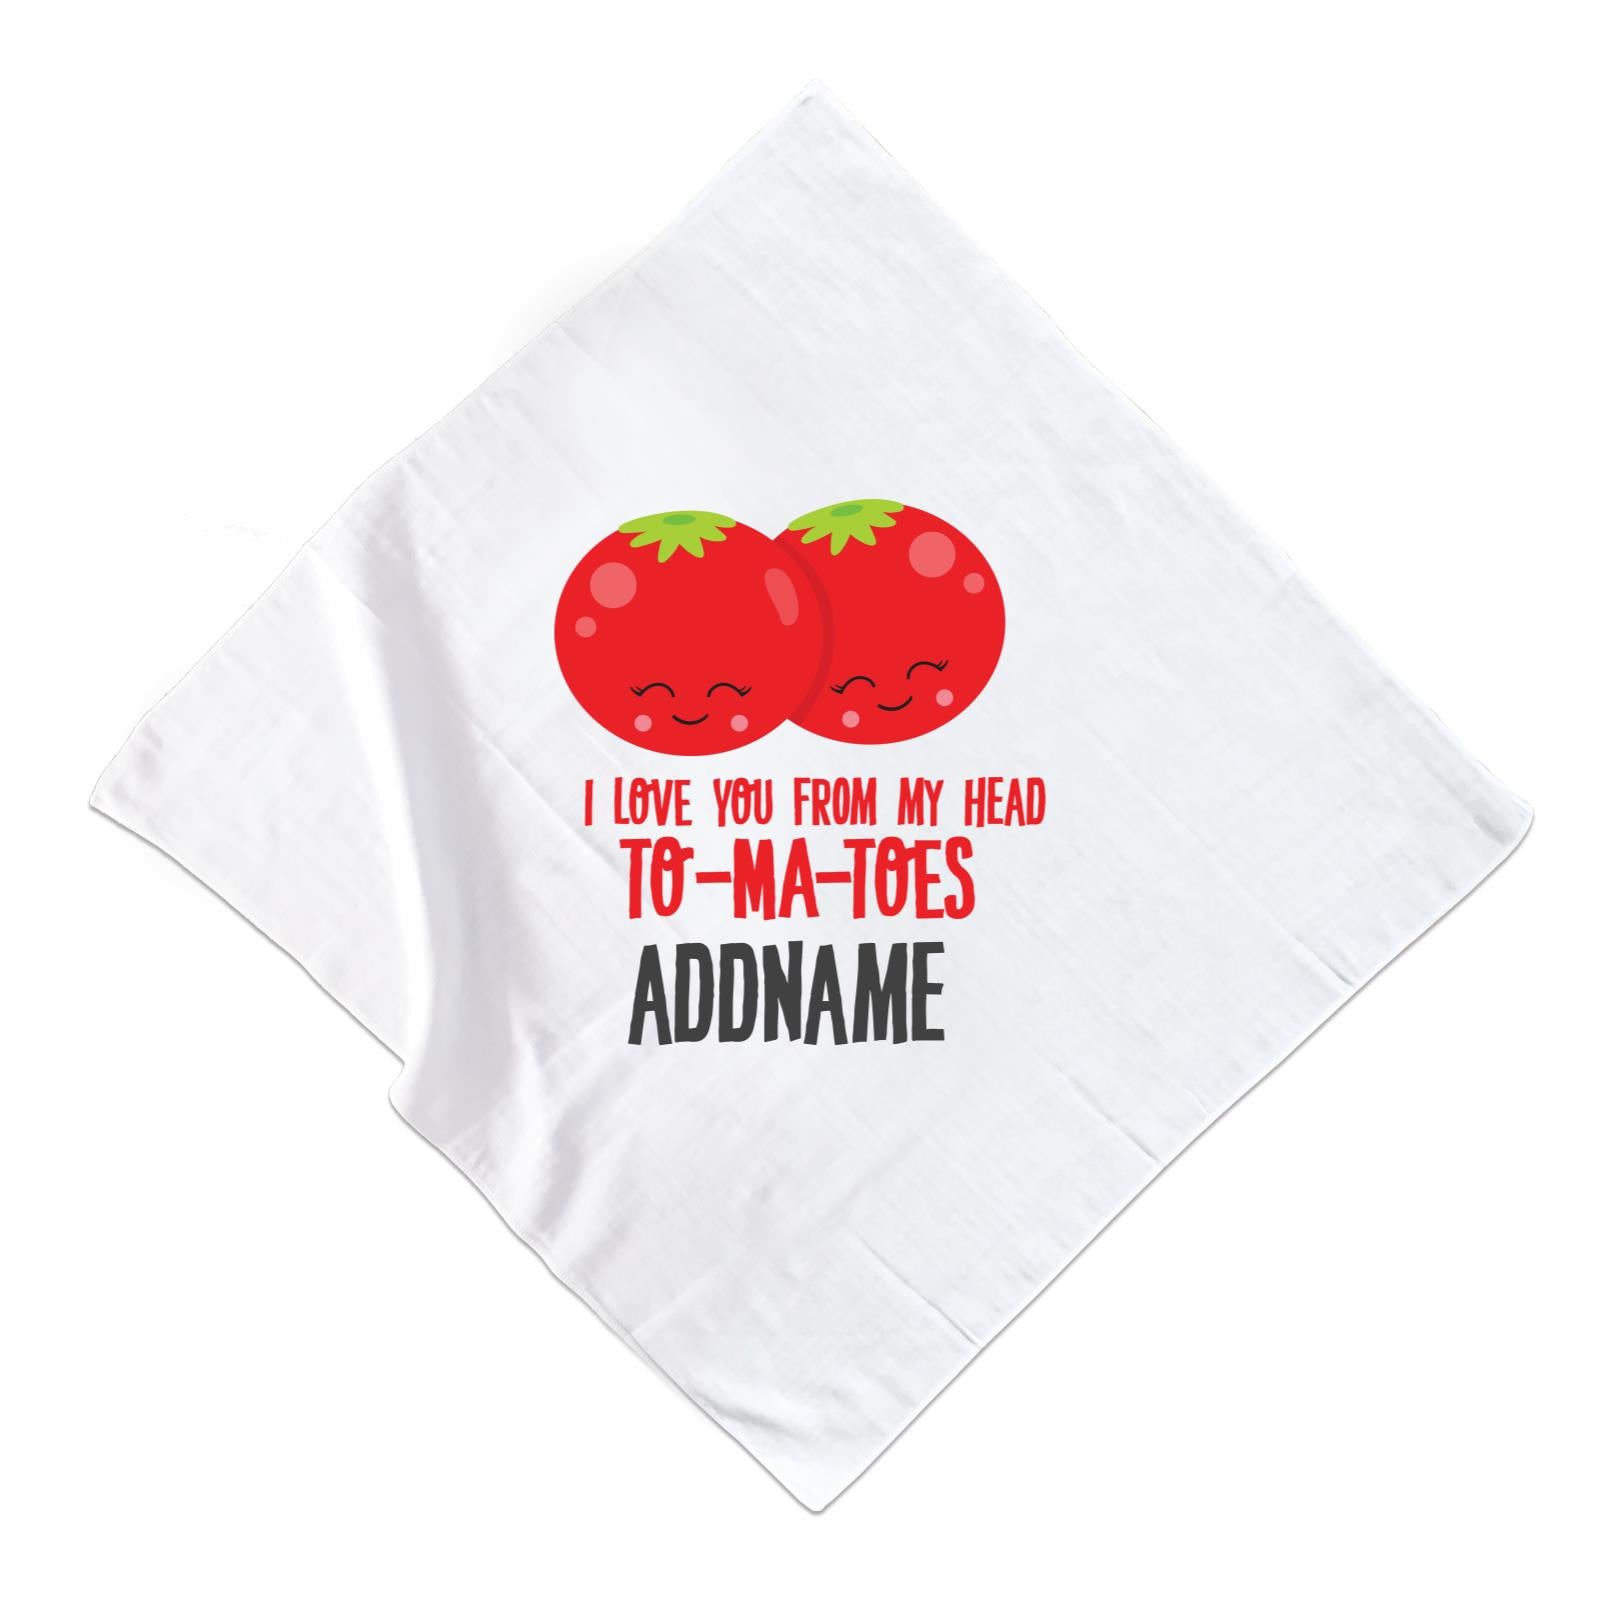 Love Food Puns I Love You From My Head TOMATOES Addname Muslin Muslin Square